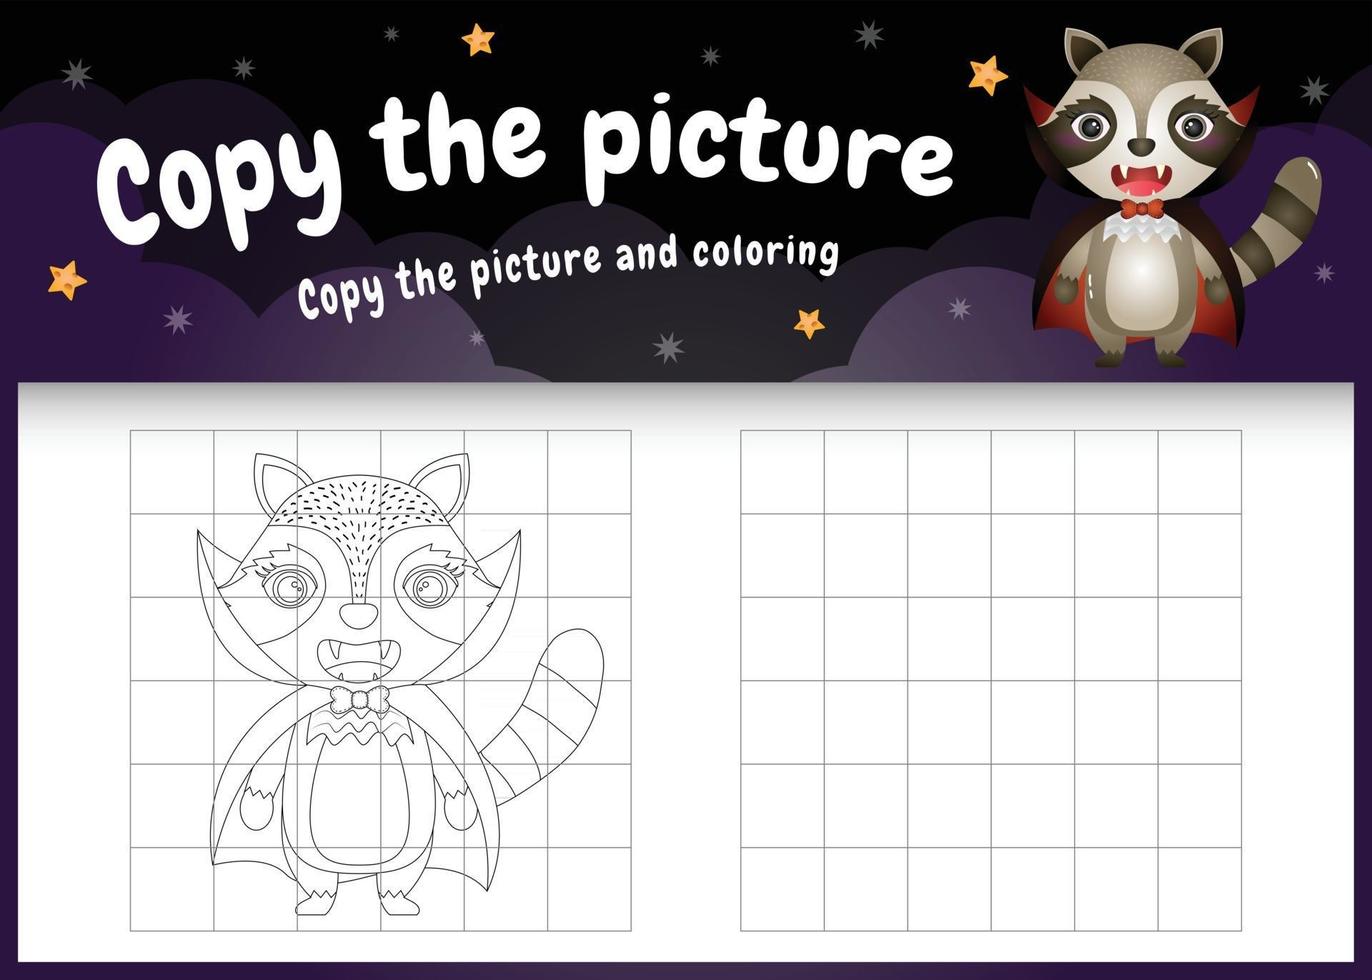 copy the picture kids game and coloring page with a cute raccoon vector